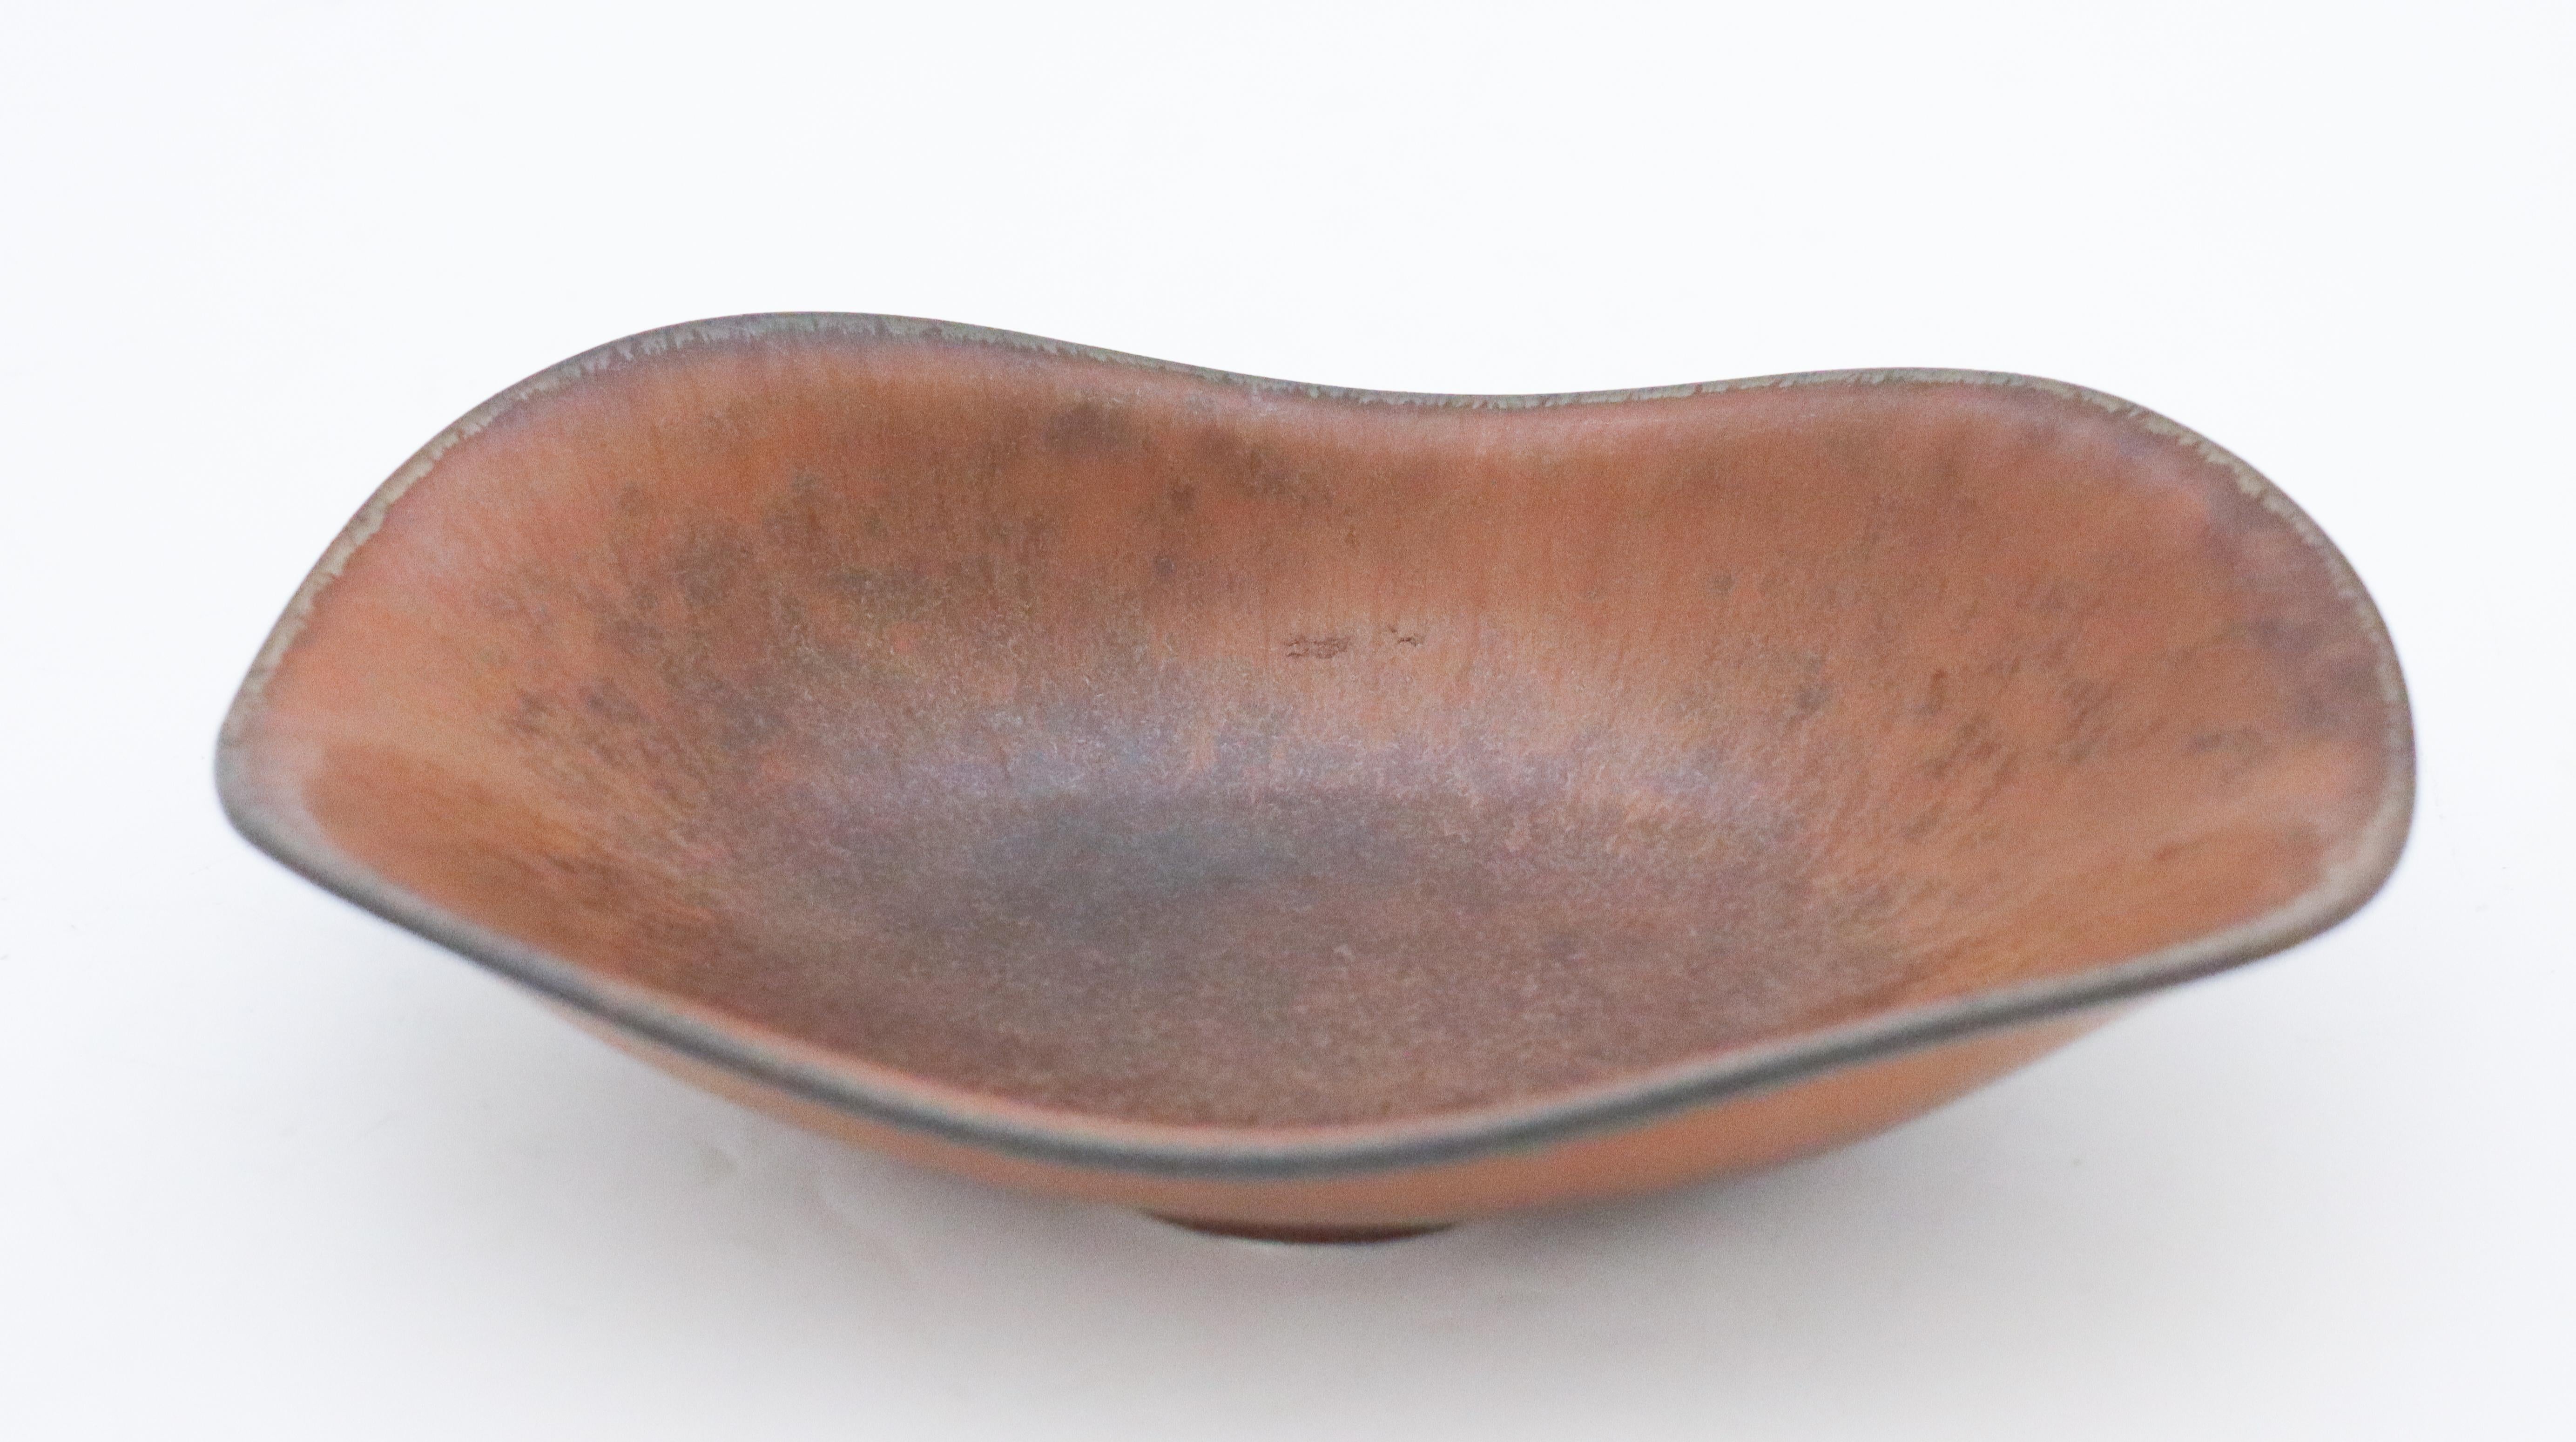 A lovely bowl designed by Gunnar Nylund at Rörstrand, it´s 17.5 x 11 cm in diameter. It has a lovely brown har fur glaze, it´s in mint condition and marked as 1:st quality.

 Gunnar Nylund was born in Paris 1904 with parents who worked as sculptors